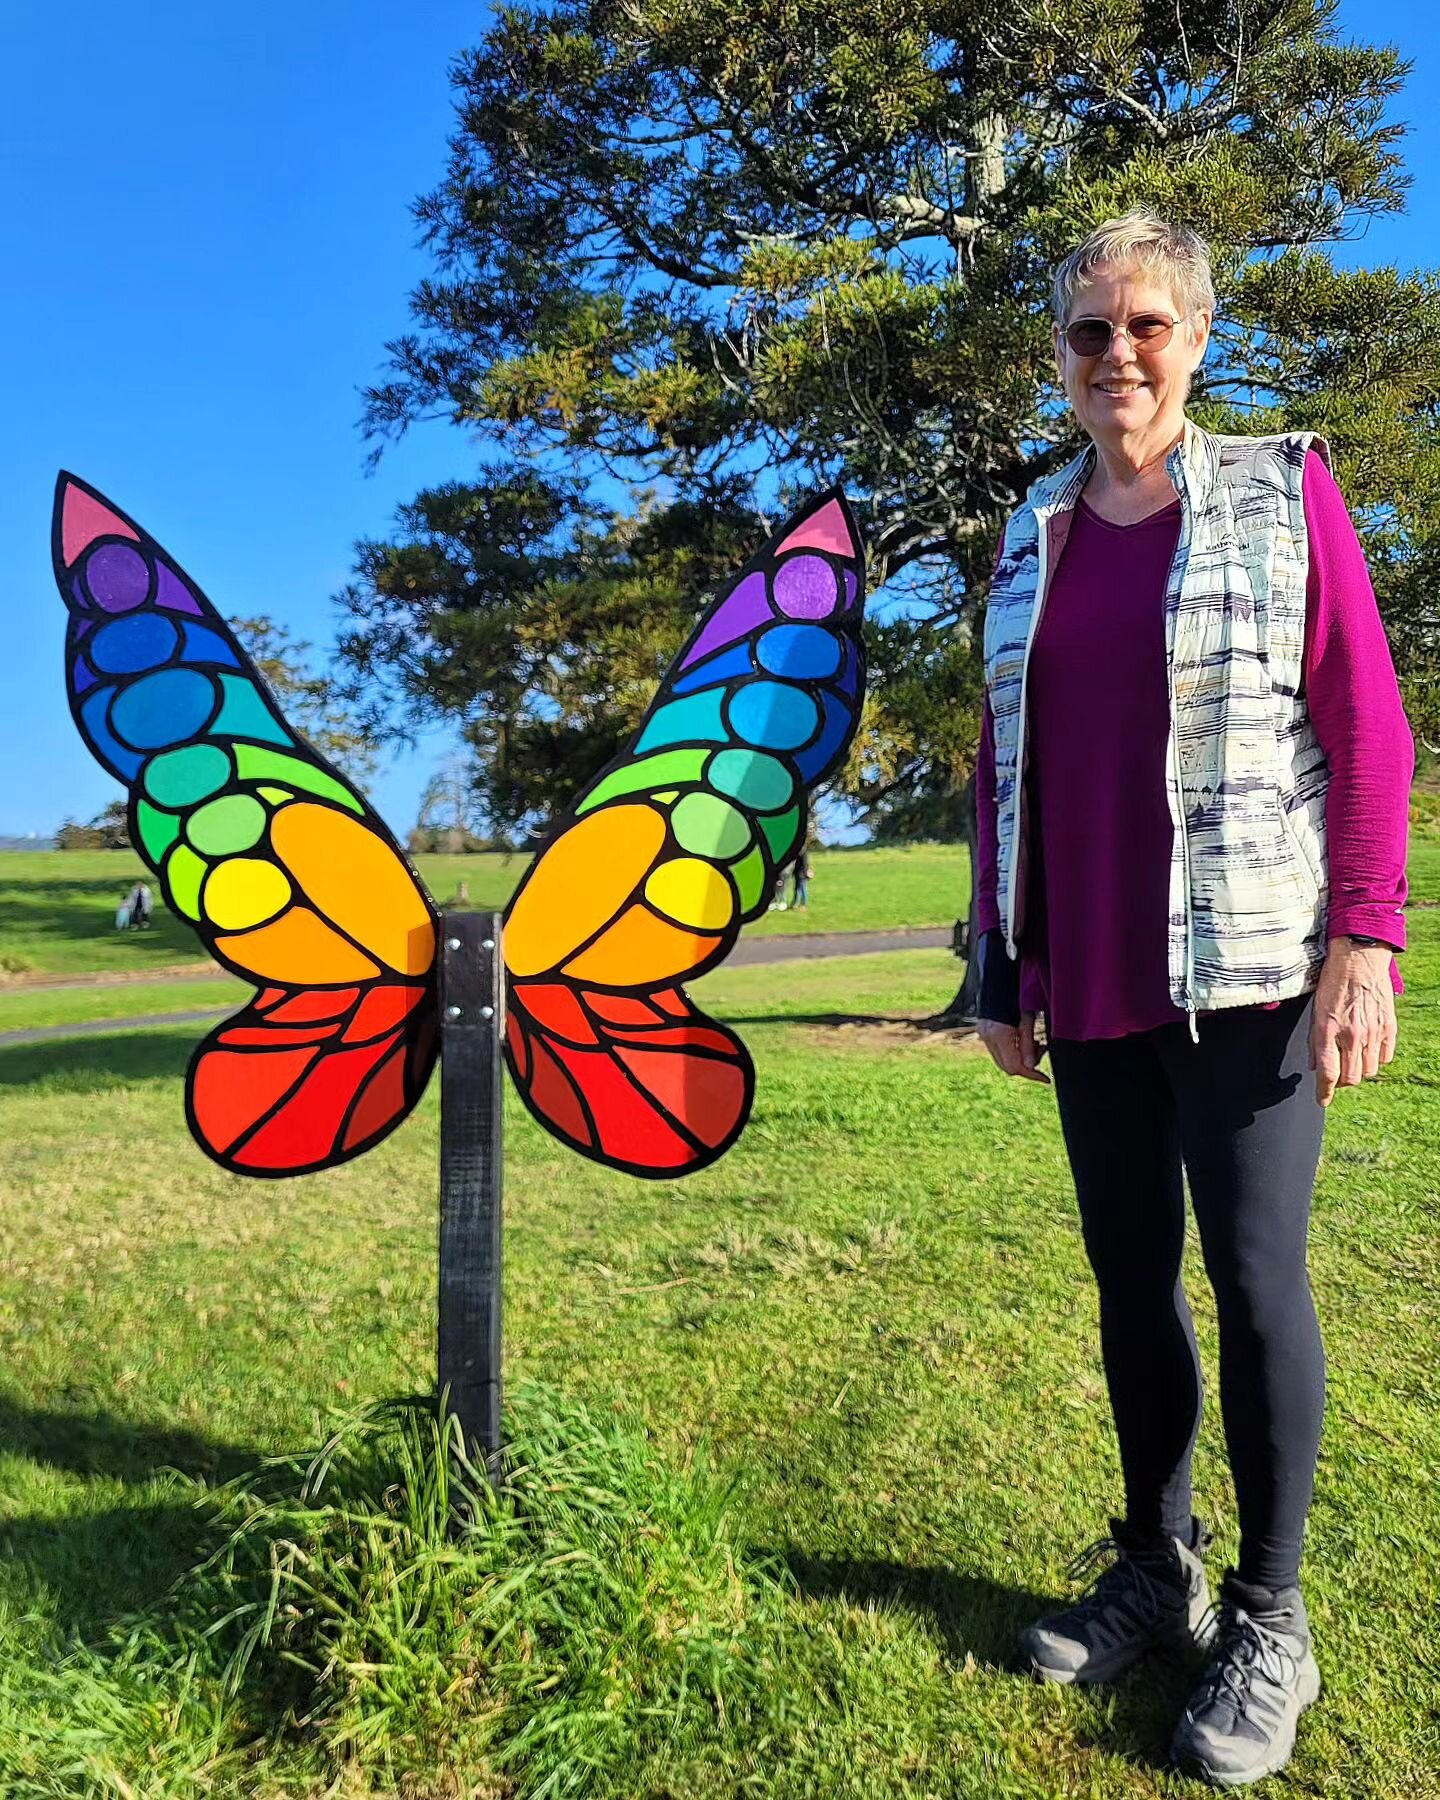 IT&rsquo;S HERE!!! Fairy Godmother Jo has just installed a sparkly, colorful new pair of fairy wings in Hobsonville Fairy Village 🦋🌈. 

When you stand in front of the wings, you can feel what it&rsquo;s like to be a fairy for a moment 💫💜

Share y